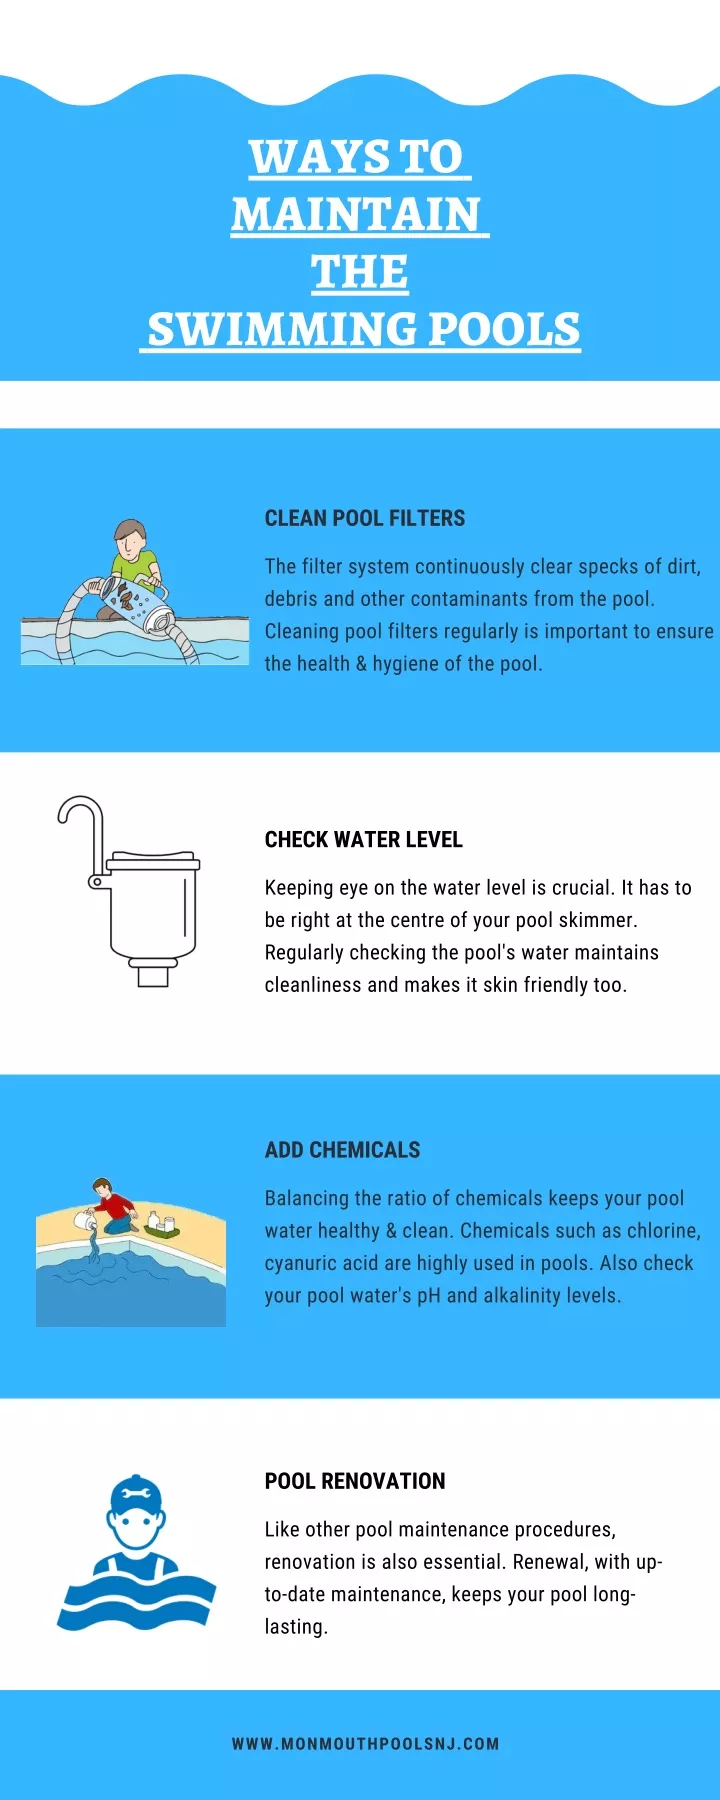 ways to maintain the swimming pools